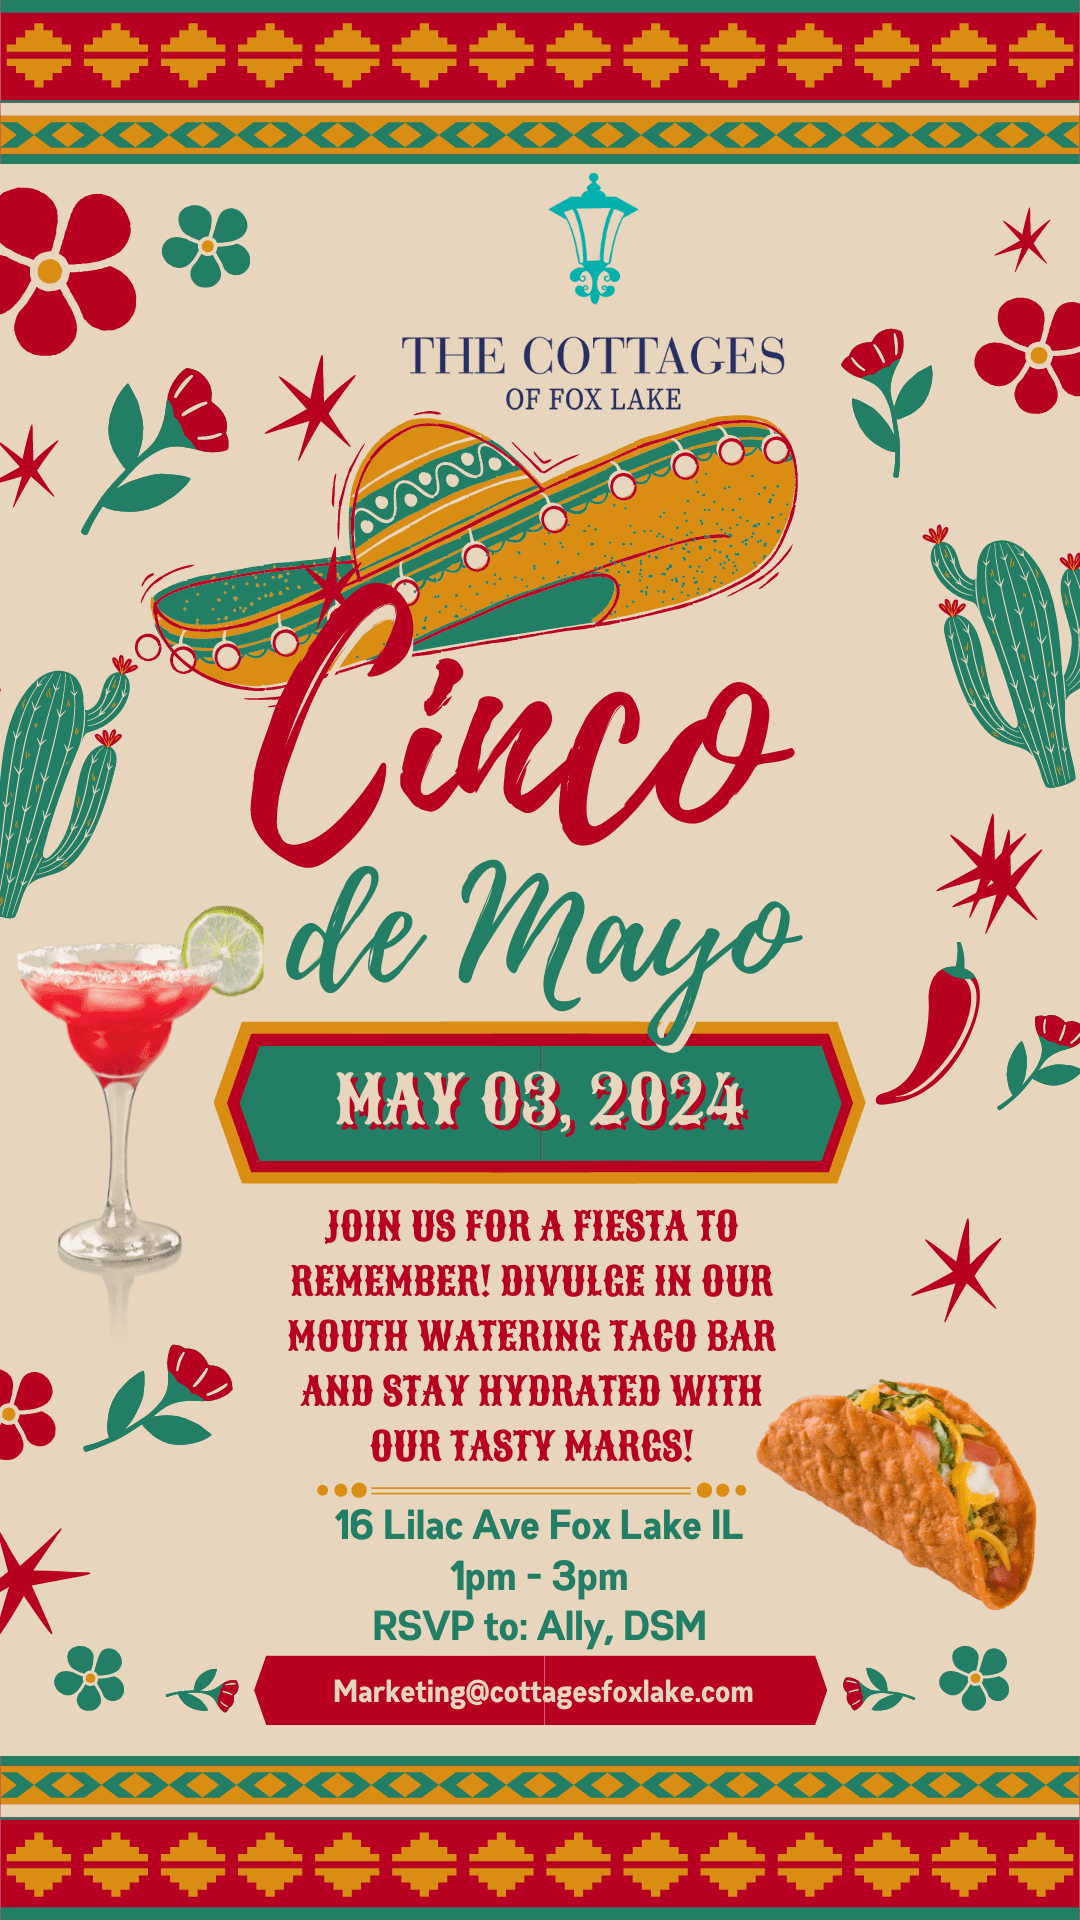 Cottages of Fox Lake - Assisted Living and Memory Care - Cinco de Mayo Party